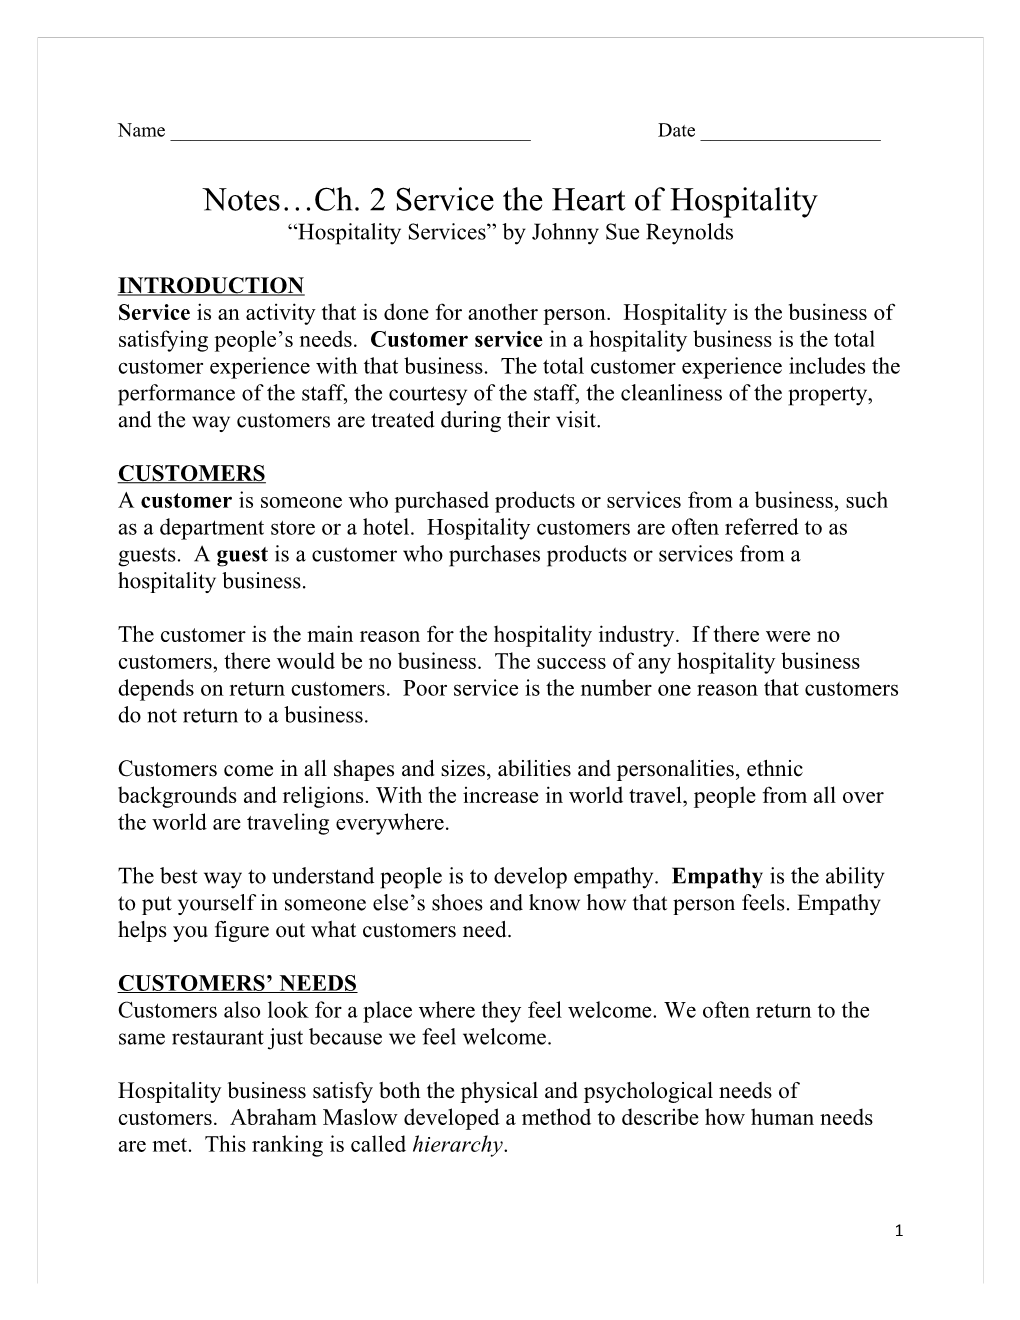 Notes Ch. 2 Service the Heart of Hospitality